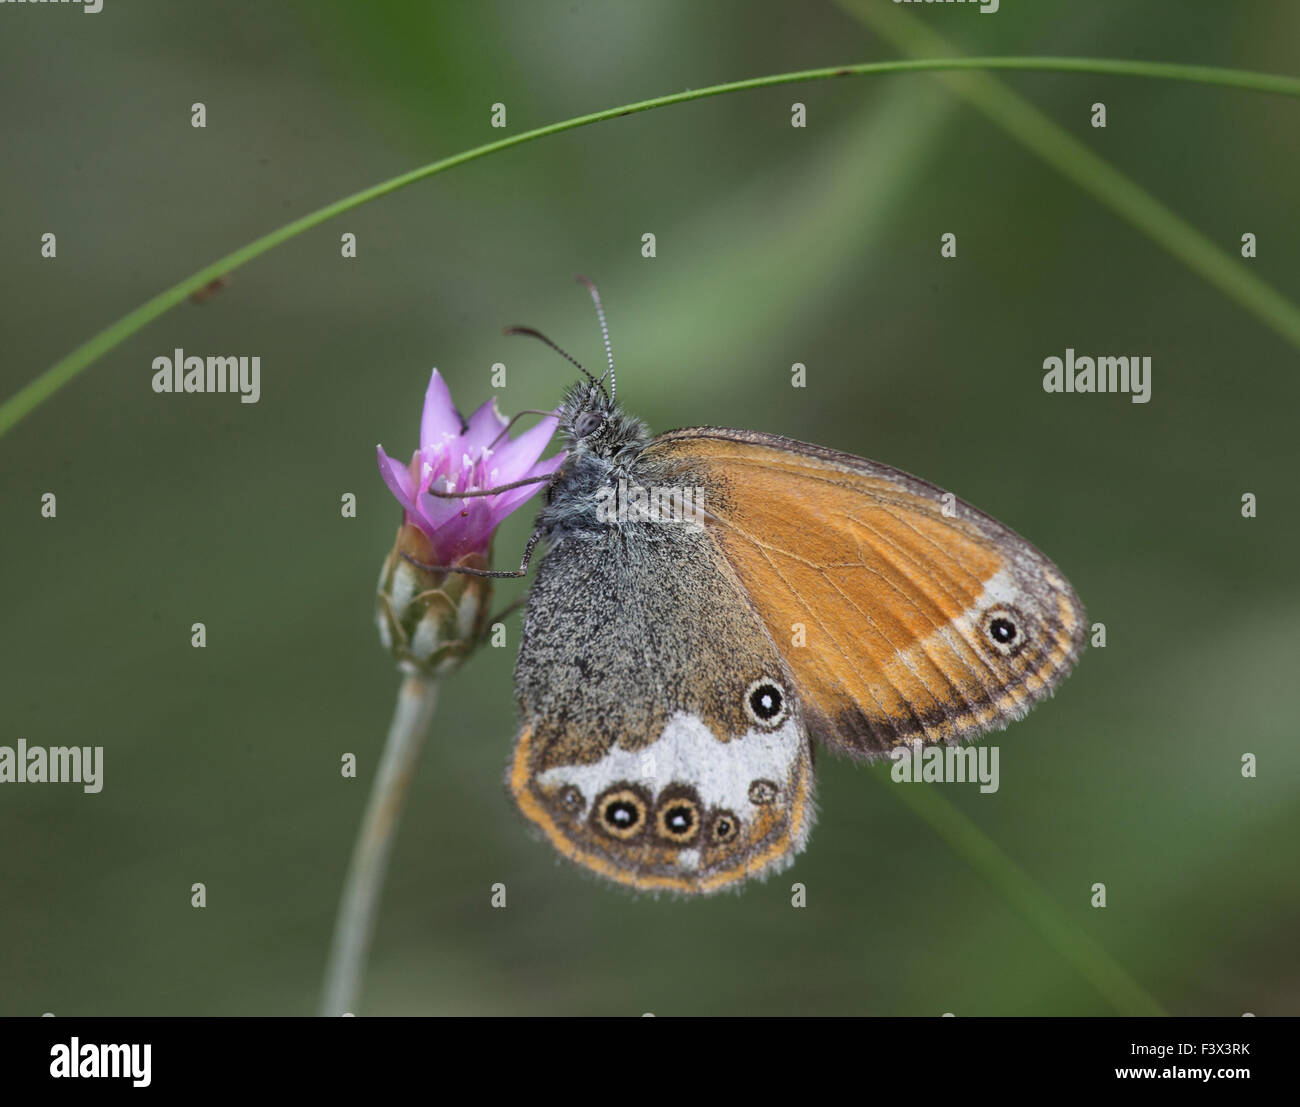 Pearly heath Taking nectar from flower Hungary June 2015 Stock Photo